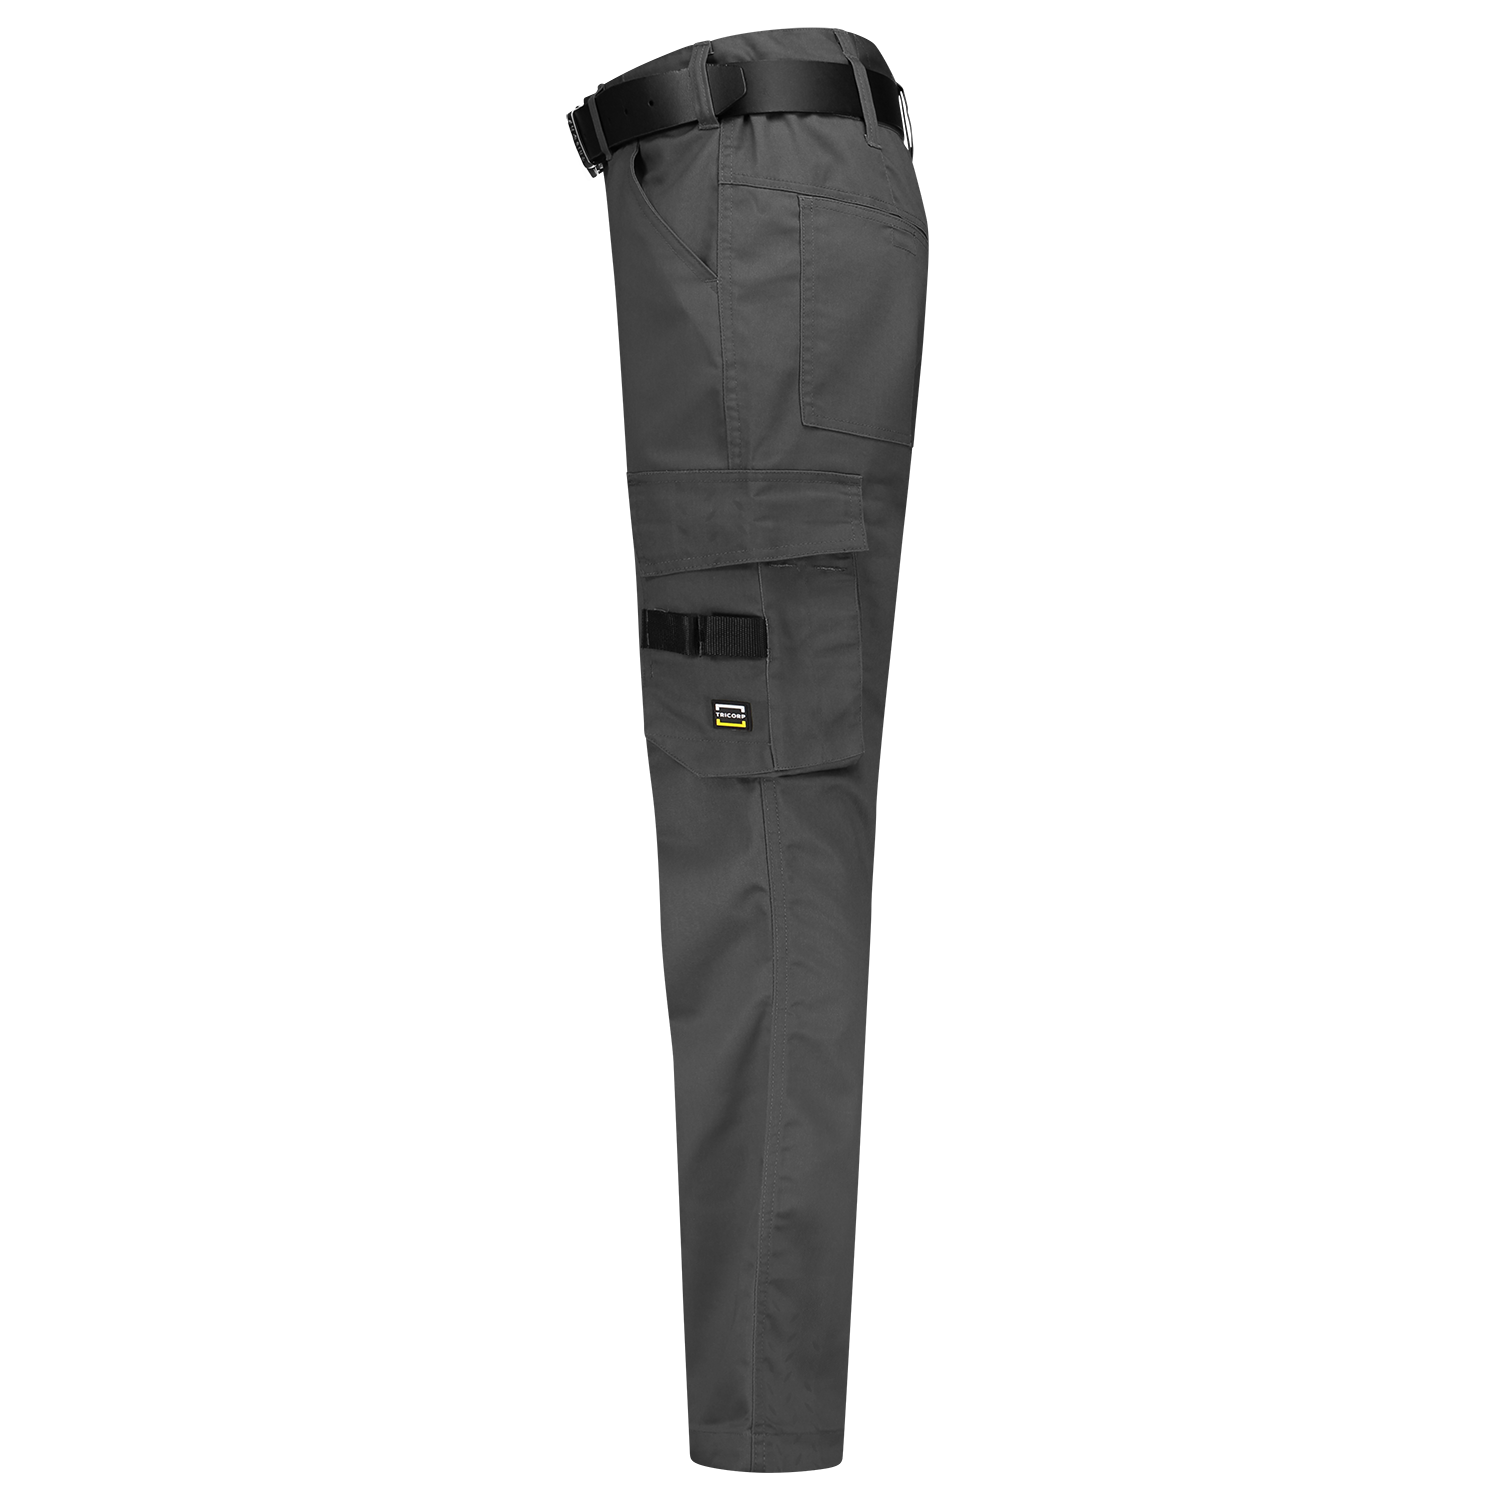 Twill work trousers